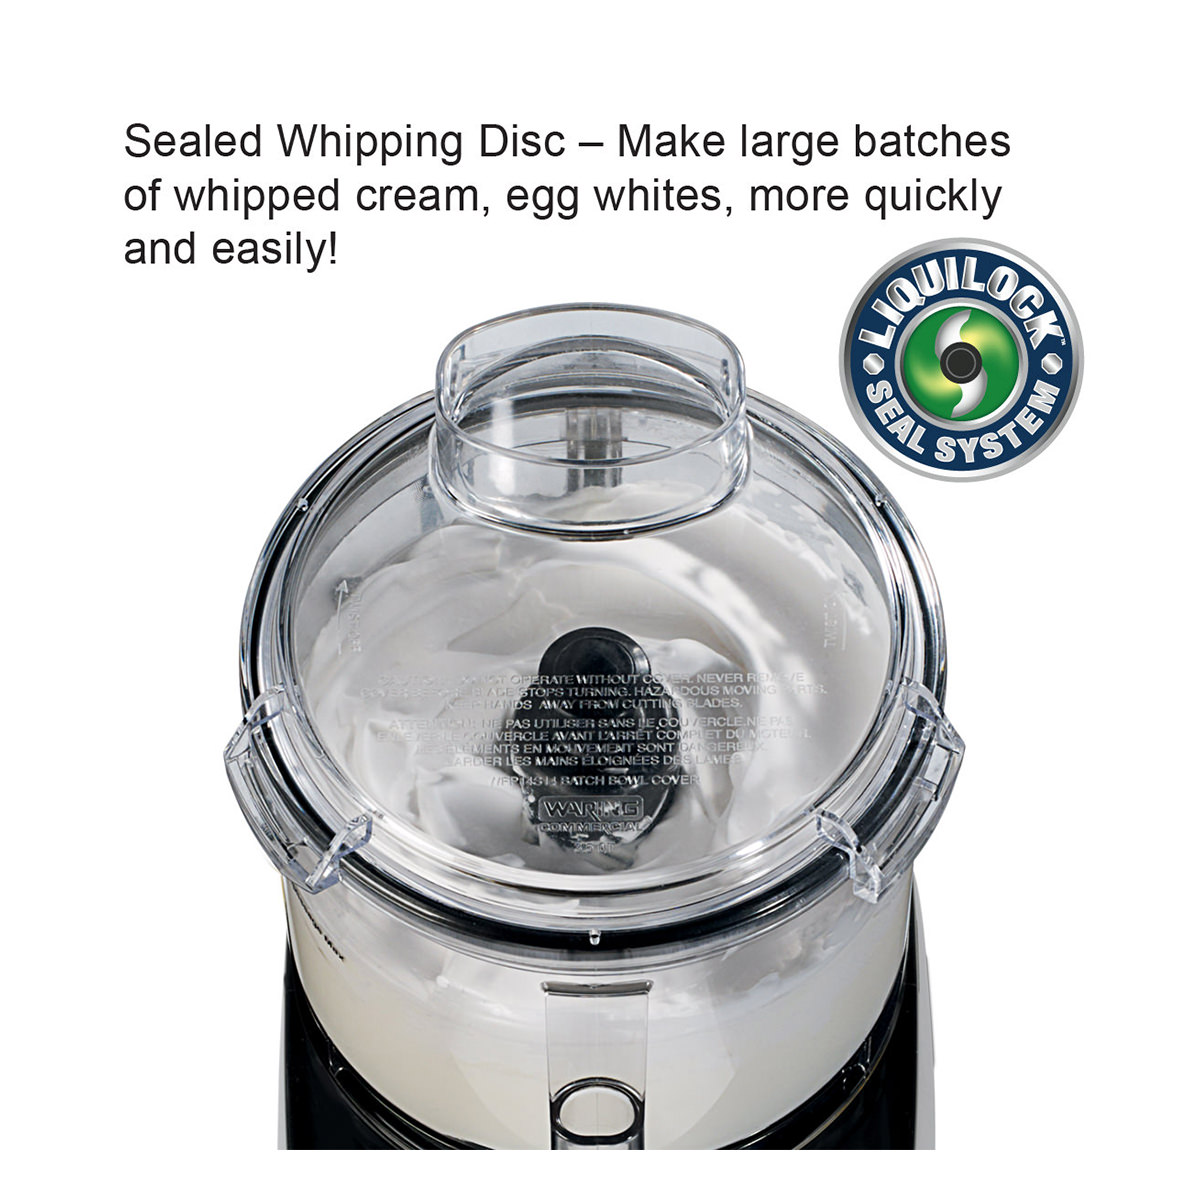 https://www.waringcommercialproducts.com/files/products/wfp14sw-waring-food-processor-inset1.jpg